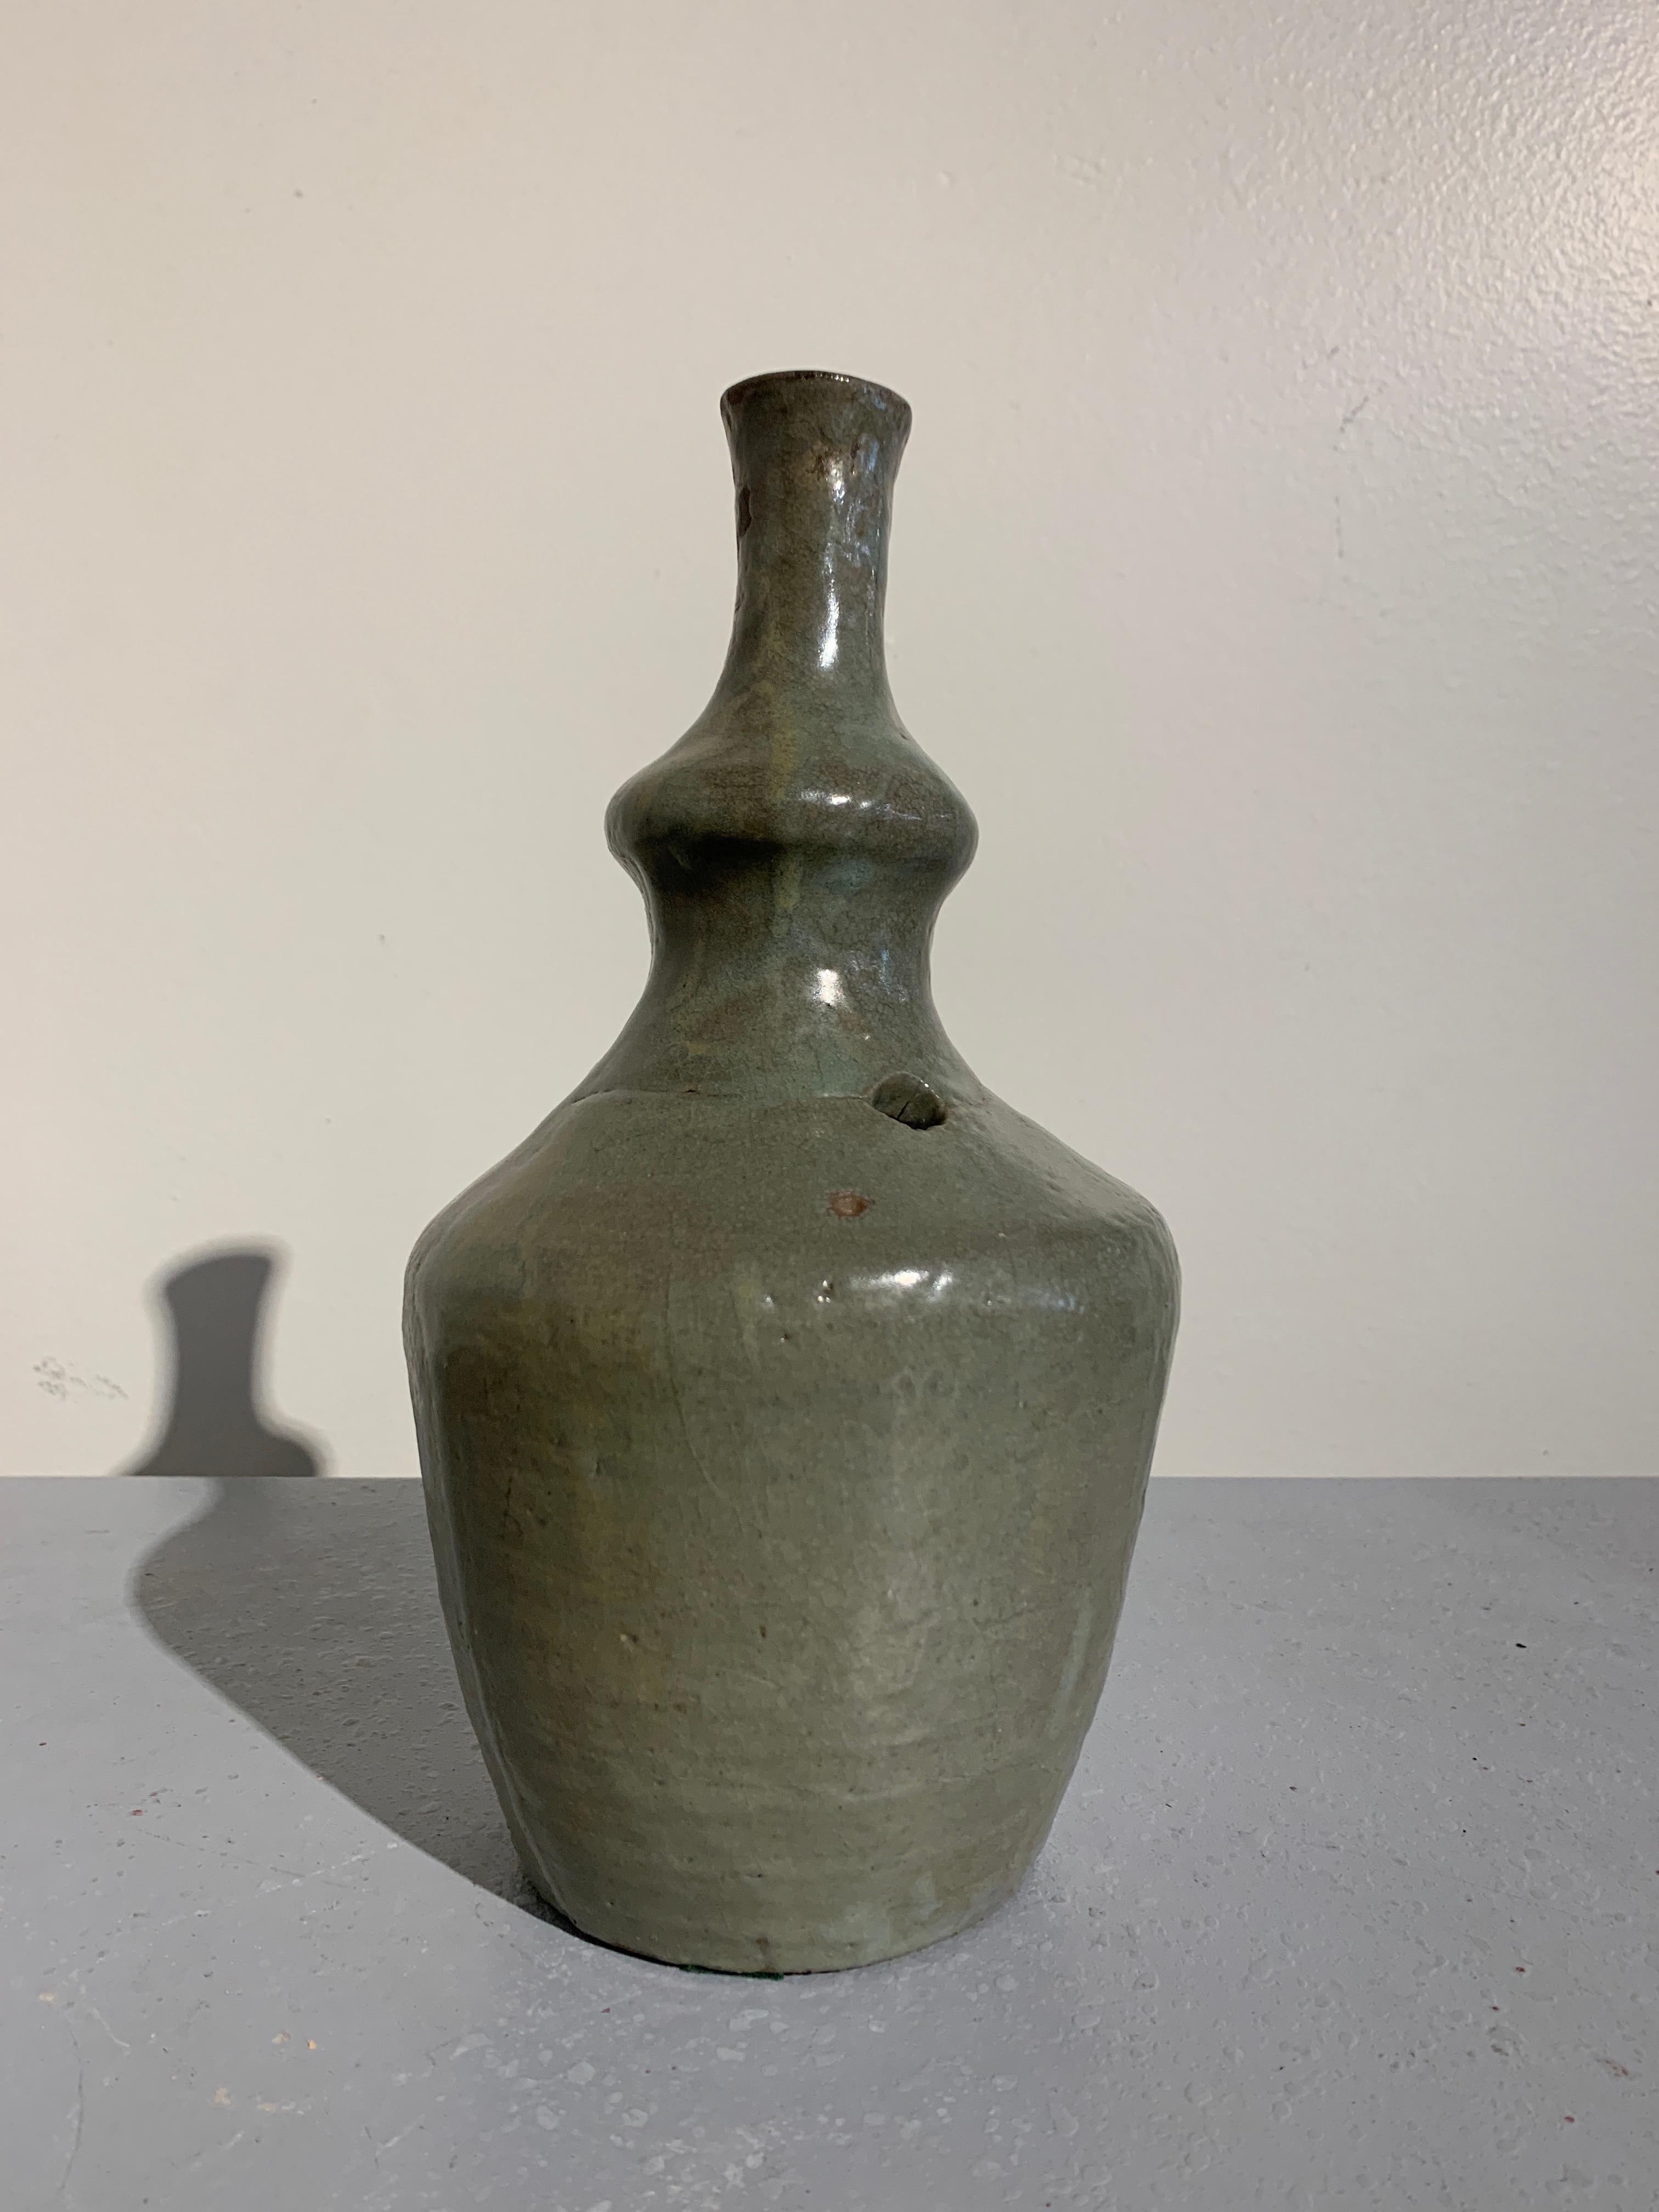 An understated and very heavily potted celadon glazed Korean ritual ewer or water sprinkler, kundinka, Goryeo Dynasty, 13th-14th century. 

The unusual bottle vessel, used as a water sprinkler for Buddhist rituals, is crafted of a heavy stoneware